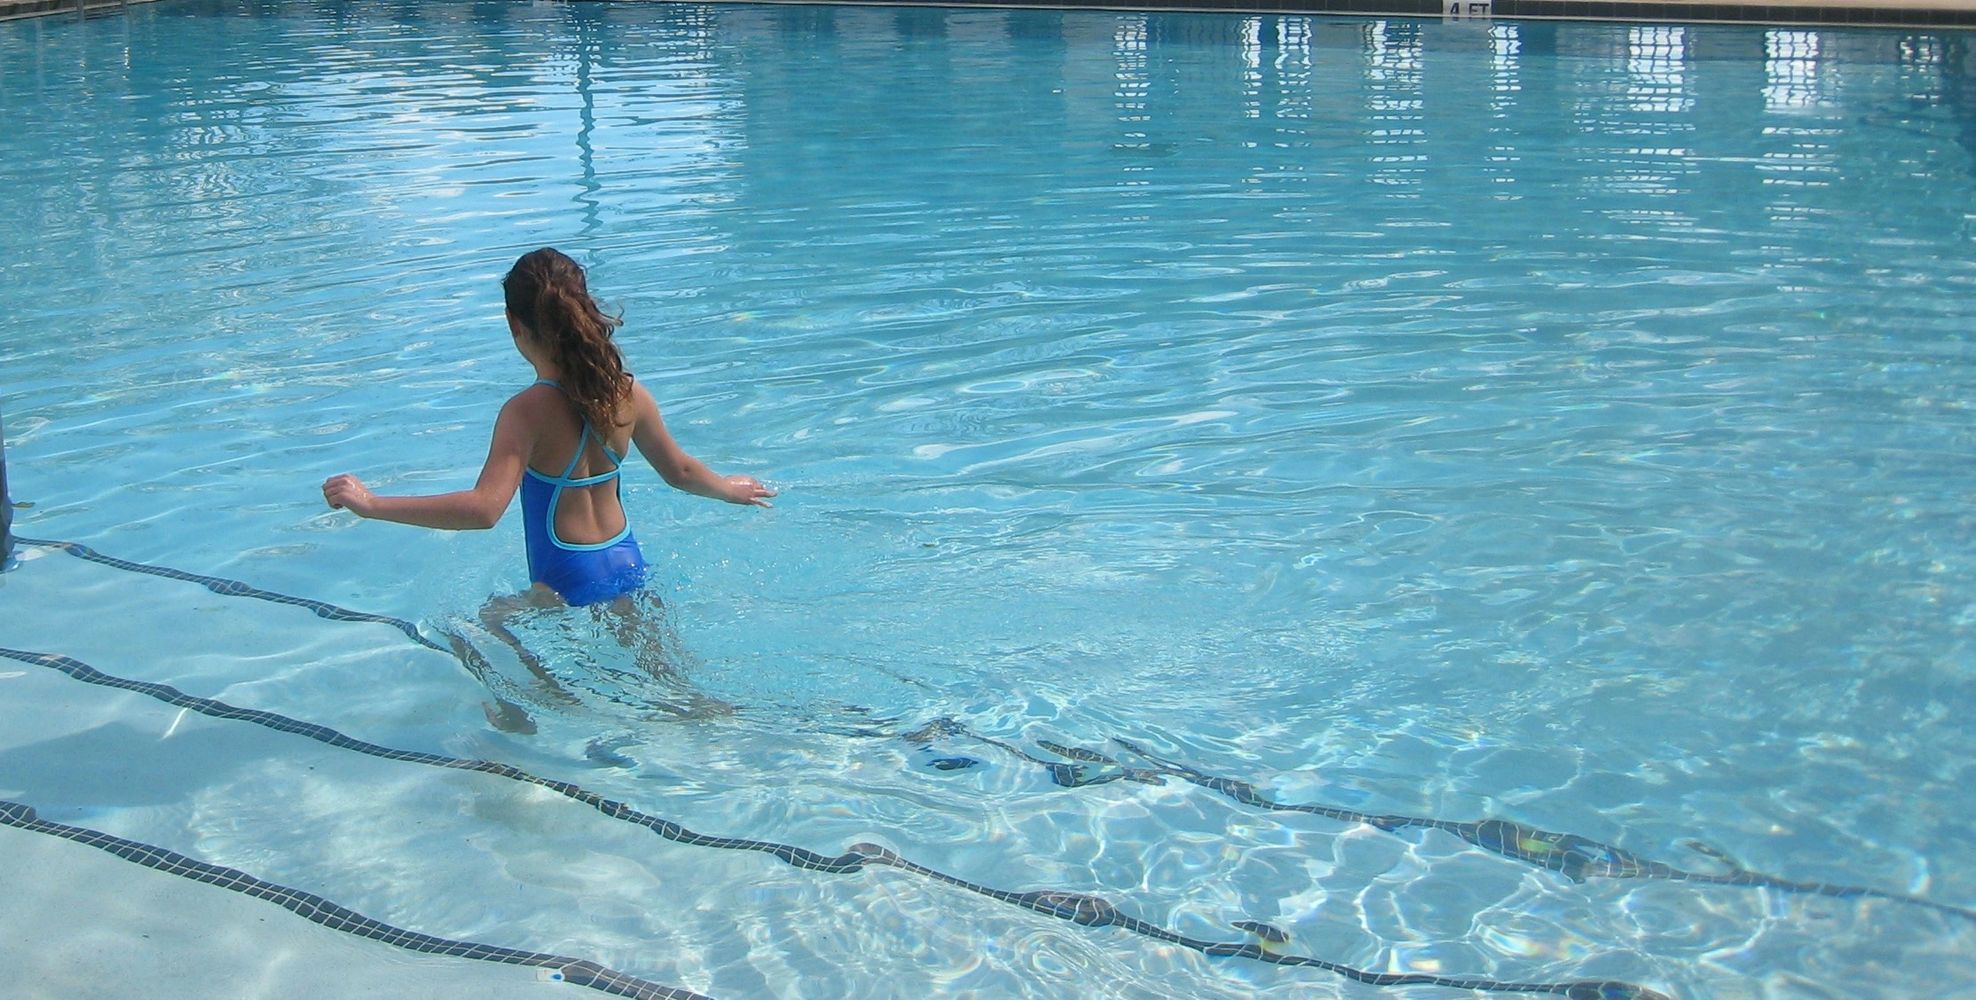 Girl wading into a pool wearing a blue and aqua swimsuit.